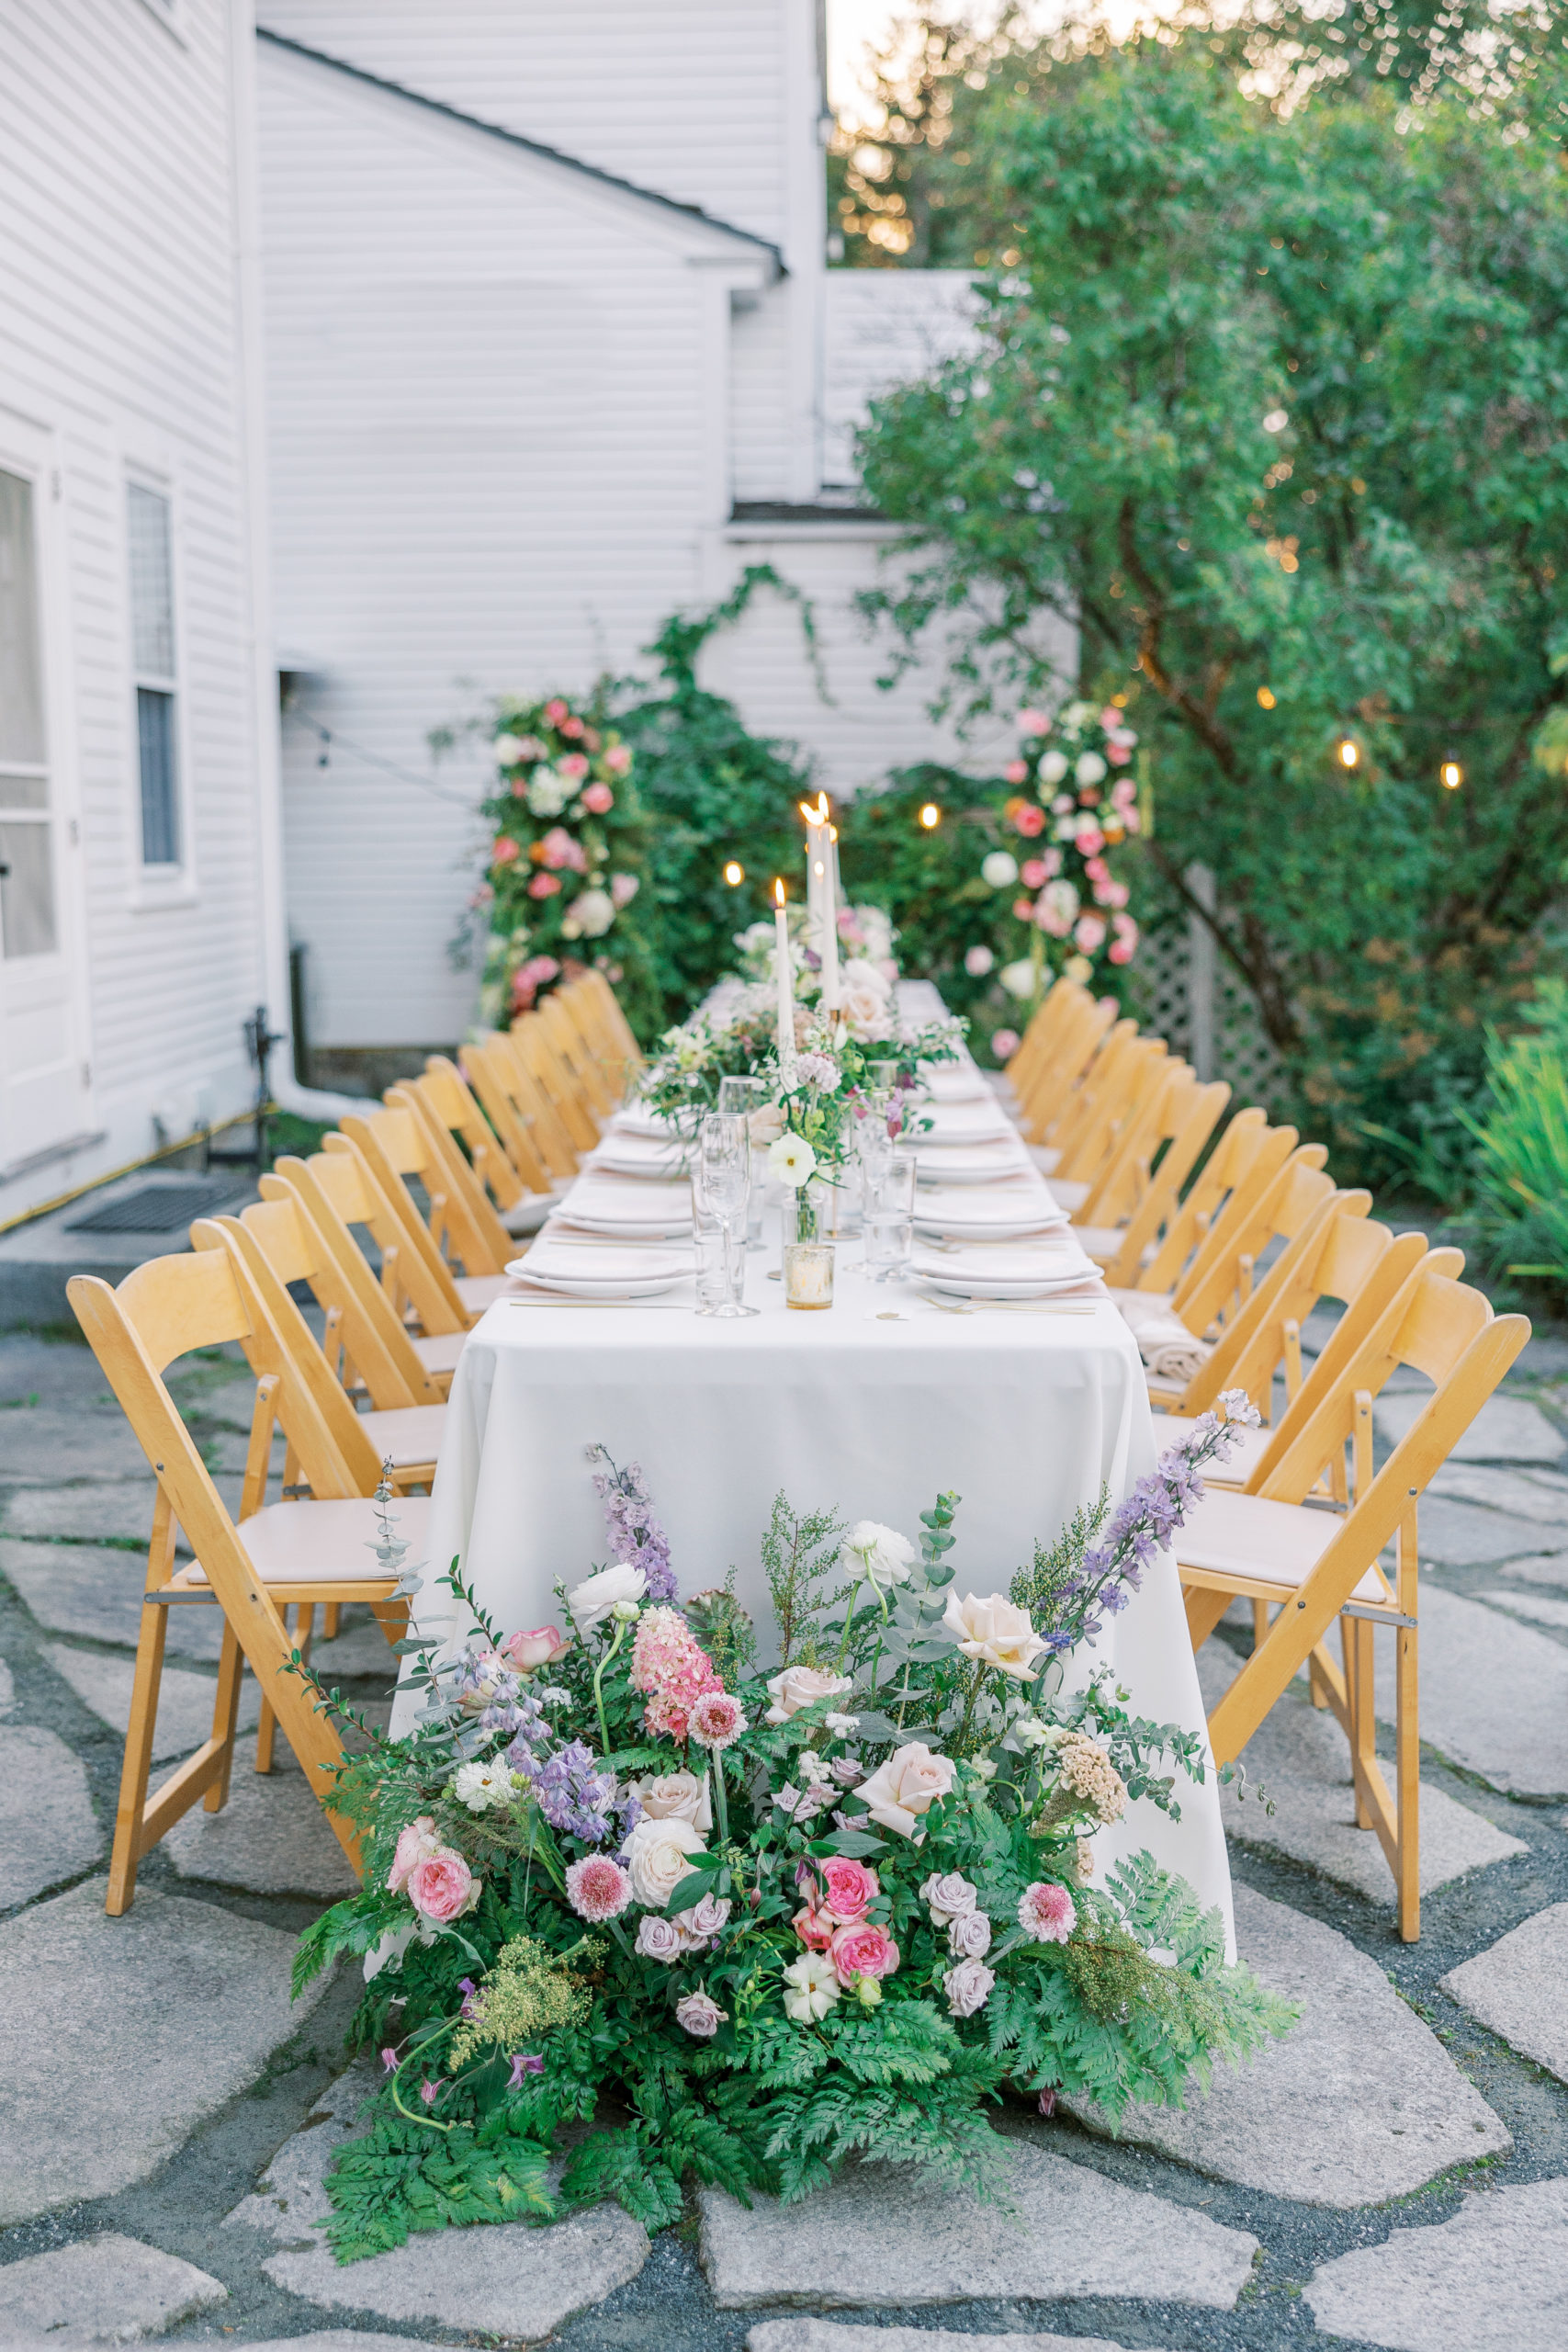 Reception table seating with one long table, tall candles, and flower centerpieces on stone patio 